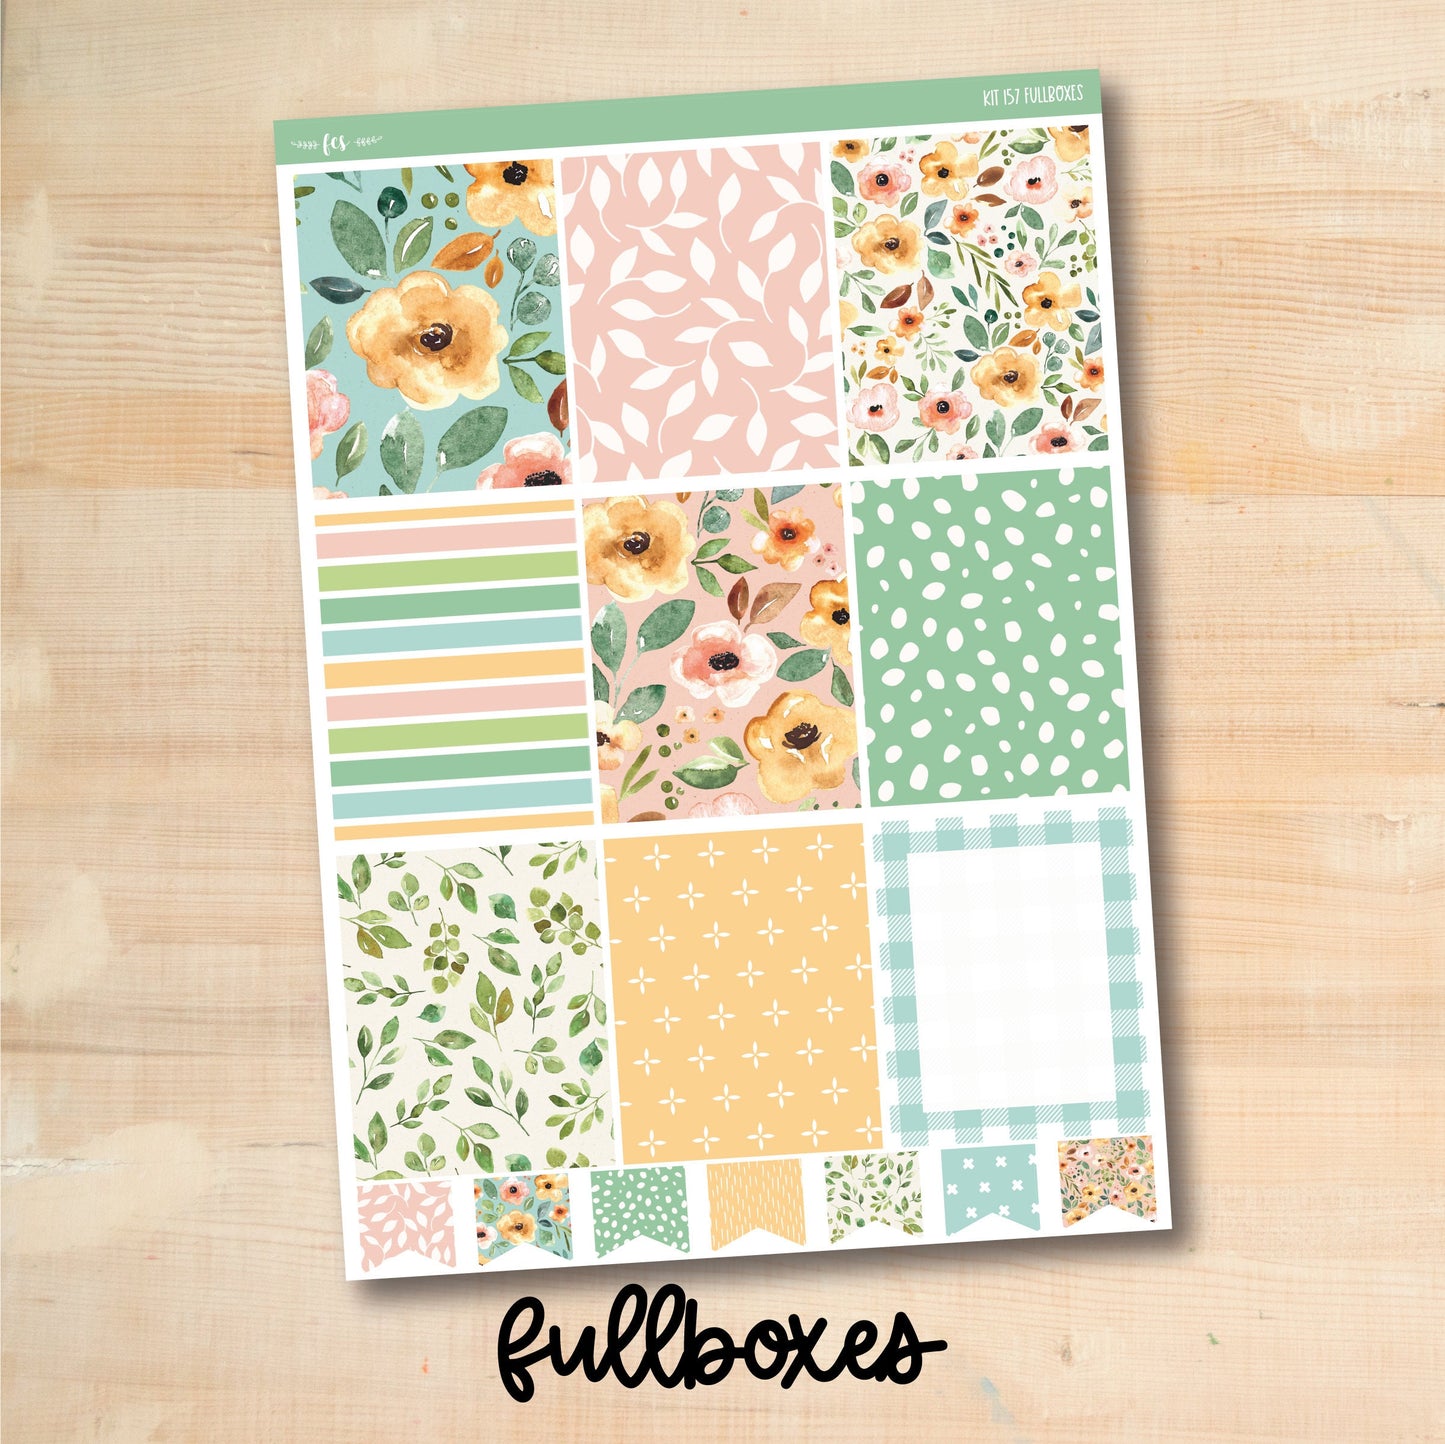 KIT-157 || SPRING FLOWERS weekly planner kit for Erin Condren, Plum Paper, MakseLife and more!